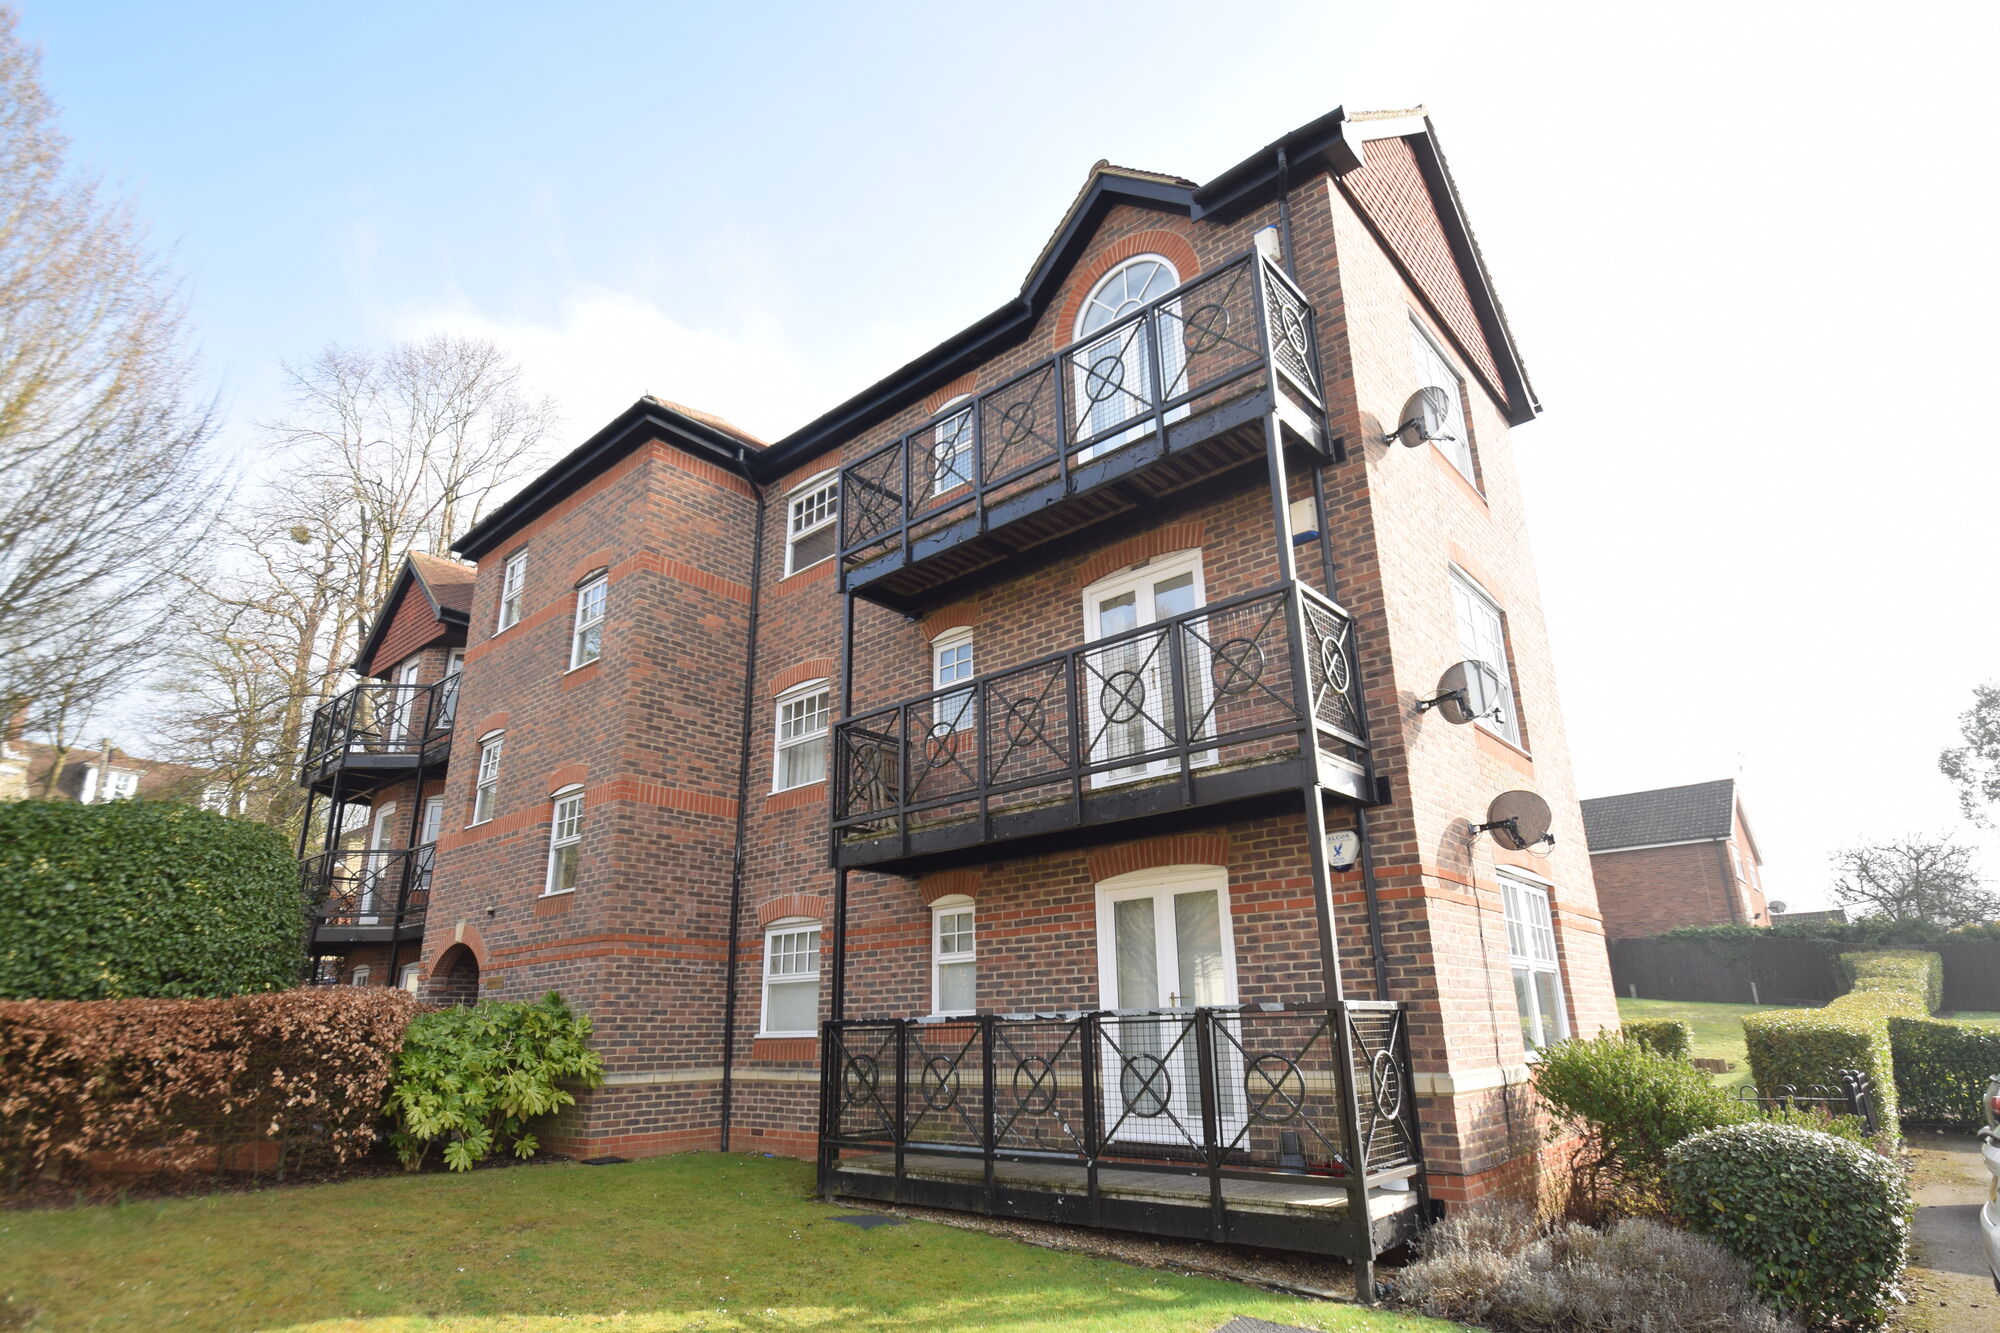 2 bedroom  flat to rent, Available from 19/06/2024 Hughenden View, Shrubbery Close, HP13, main image